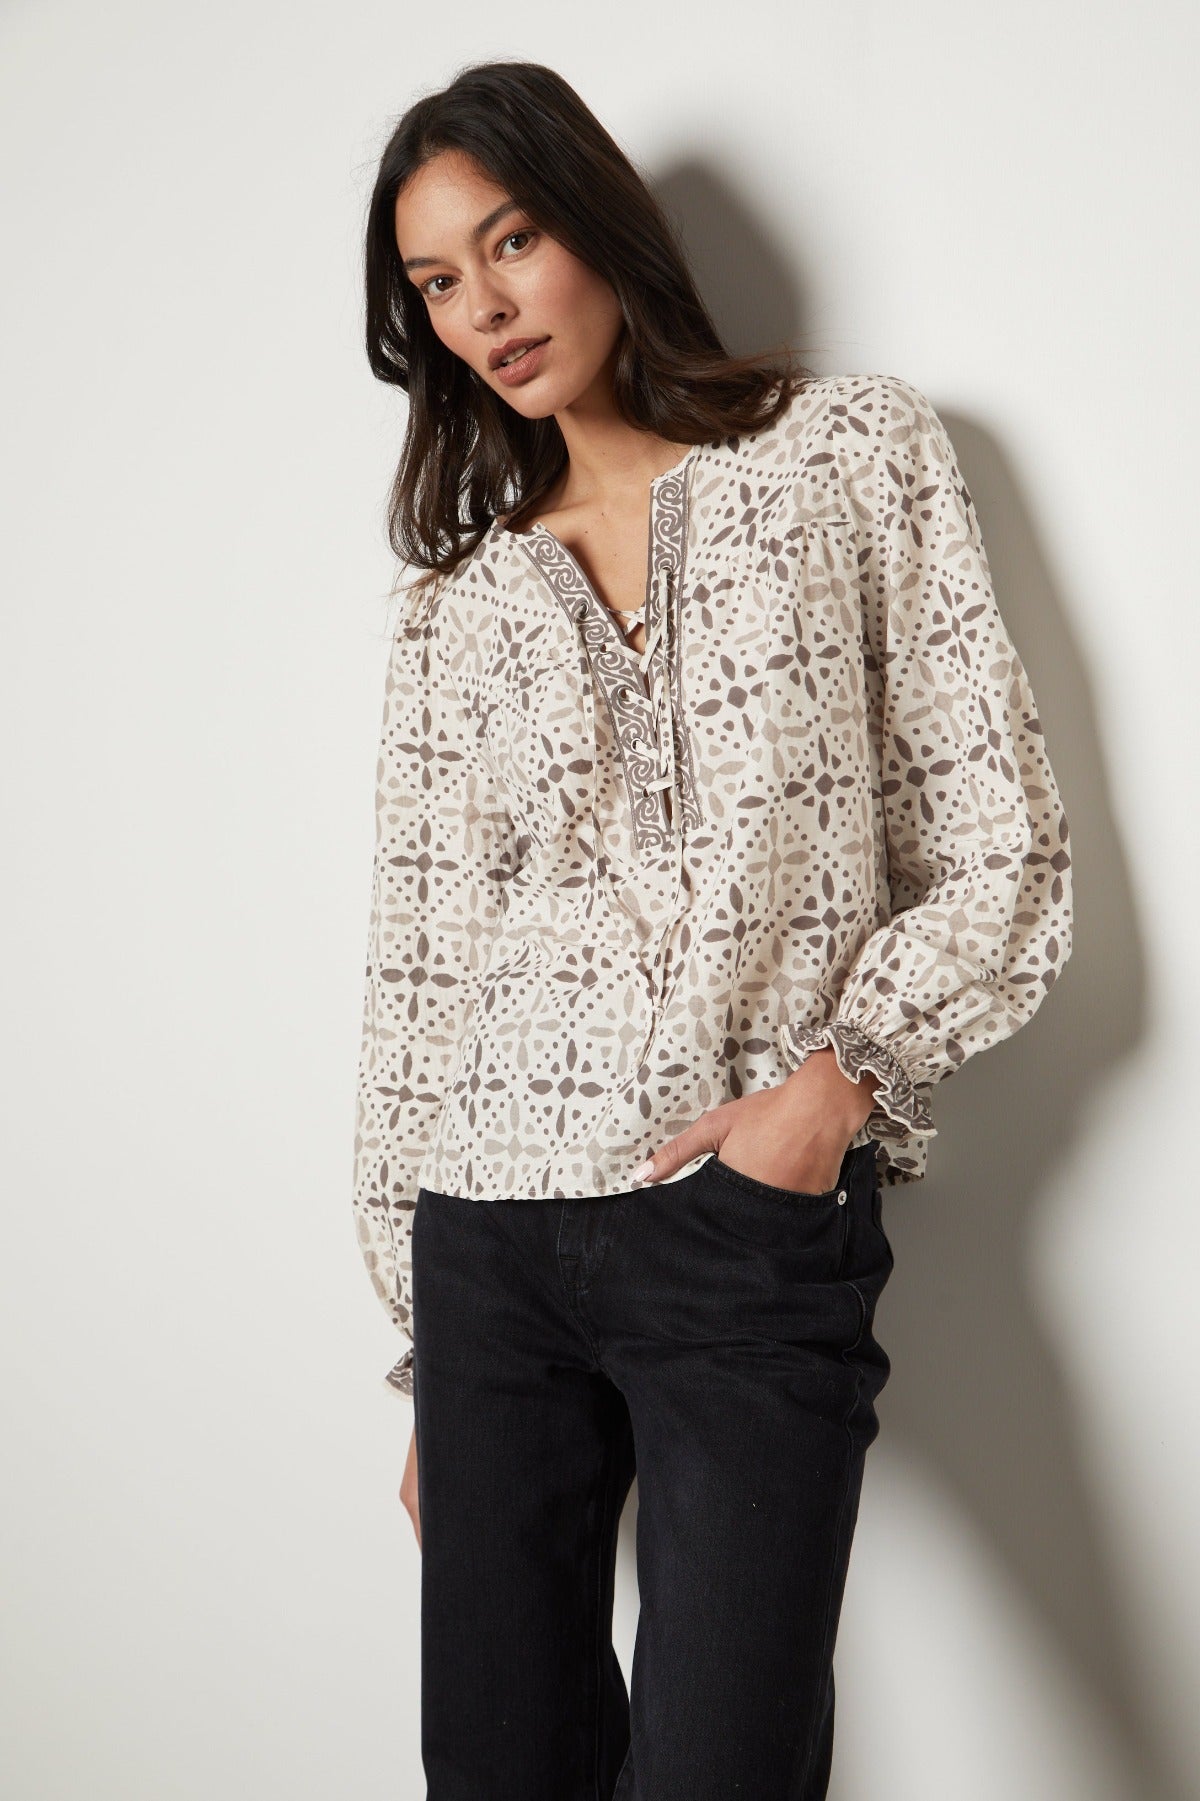   The model is wearing the Velvet by Graham & Spencer AUDETTE PRINTED BOHO TOP with a geometric pattern in earth tones. 